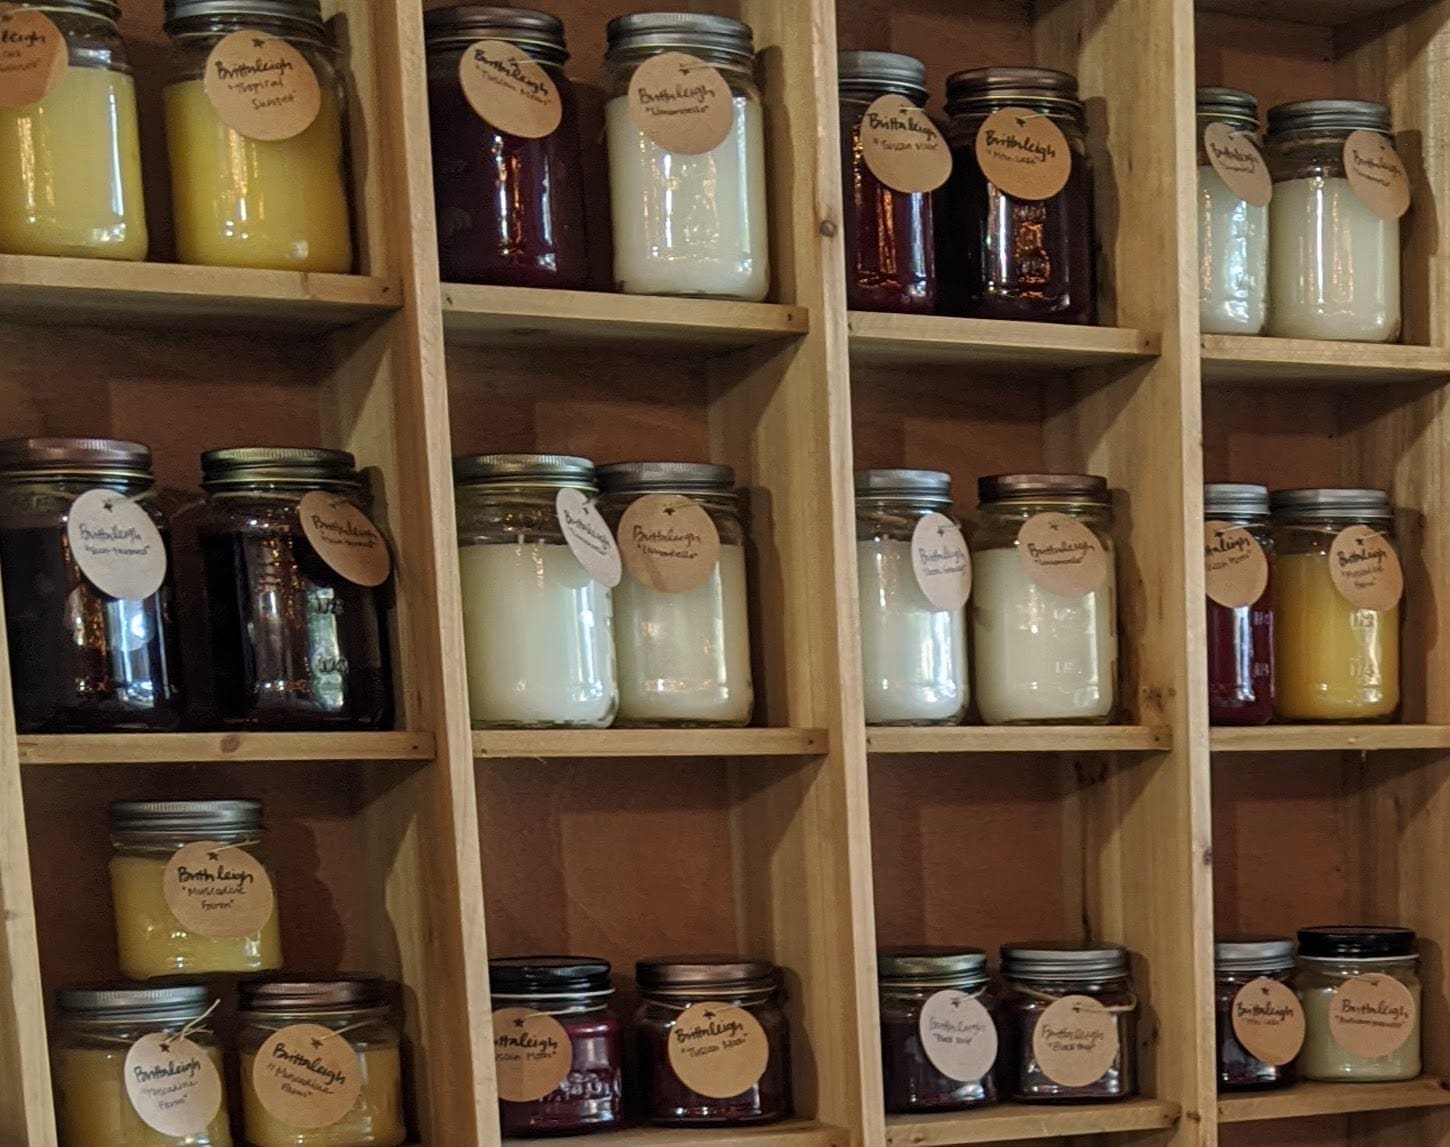 A wooden shelf with many jars of different kinds of jams and jellies.